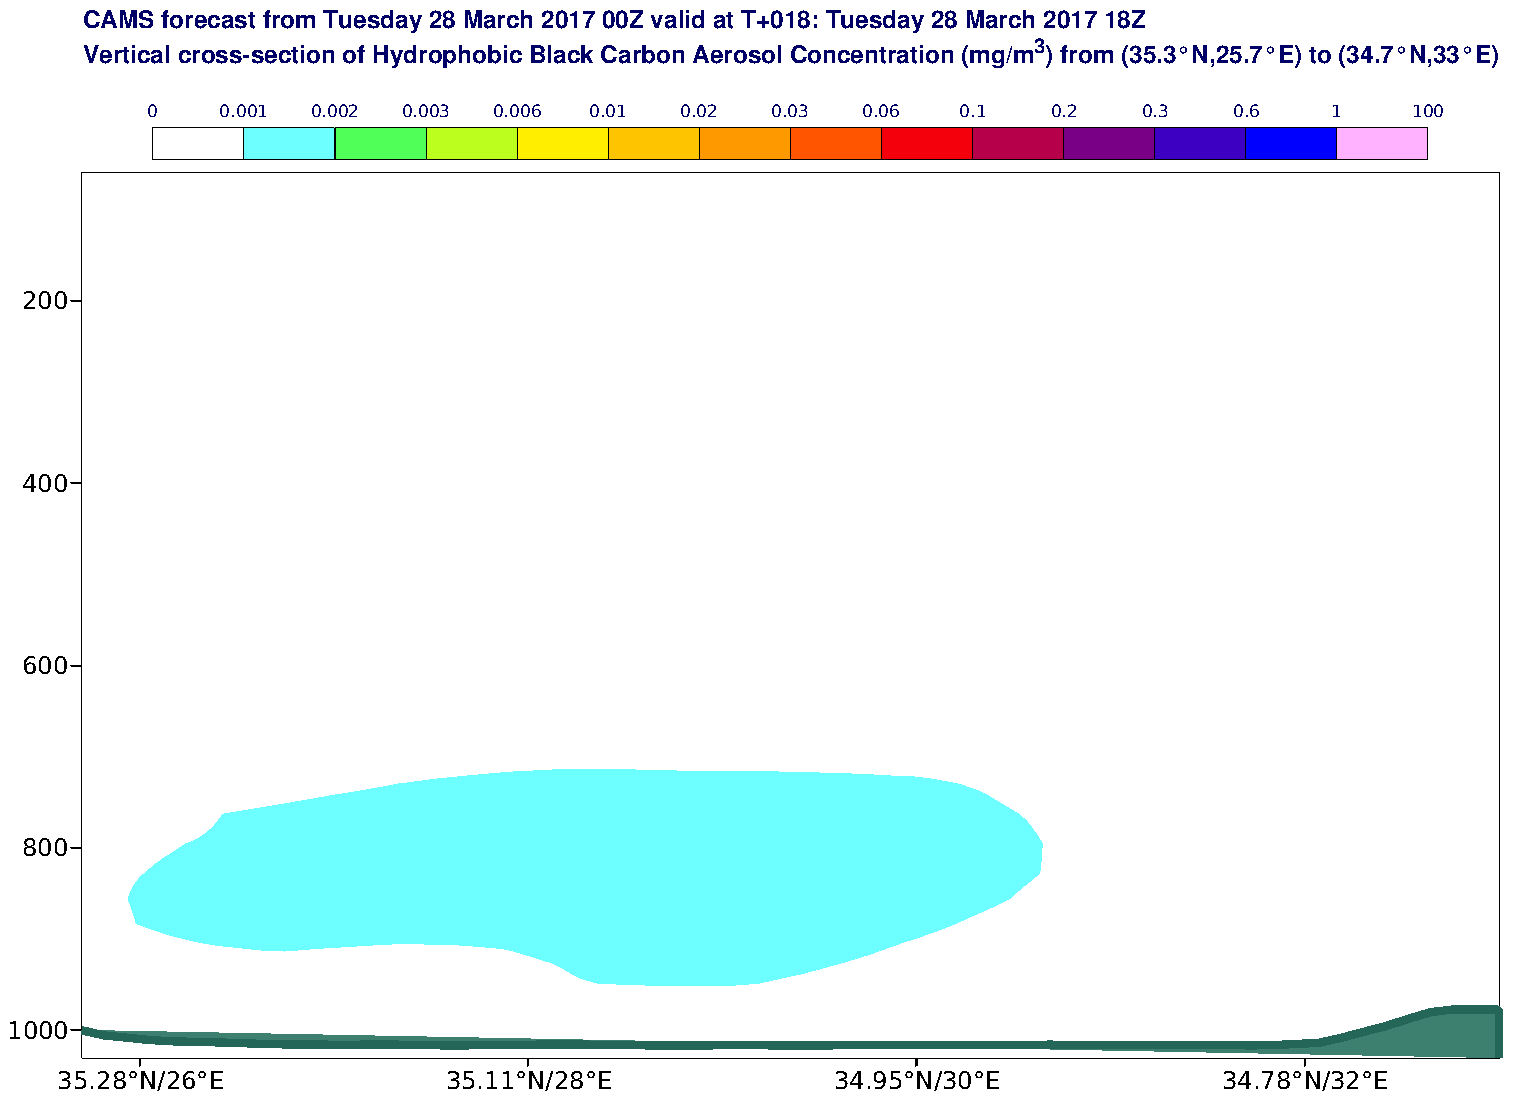 Vertical cross-section of Hydrophobic Black Carbon Aerosol Concentration (mg/m3) valid at T18 - 2017-03-28 18:00